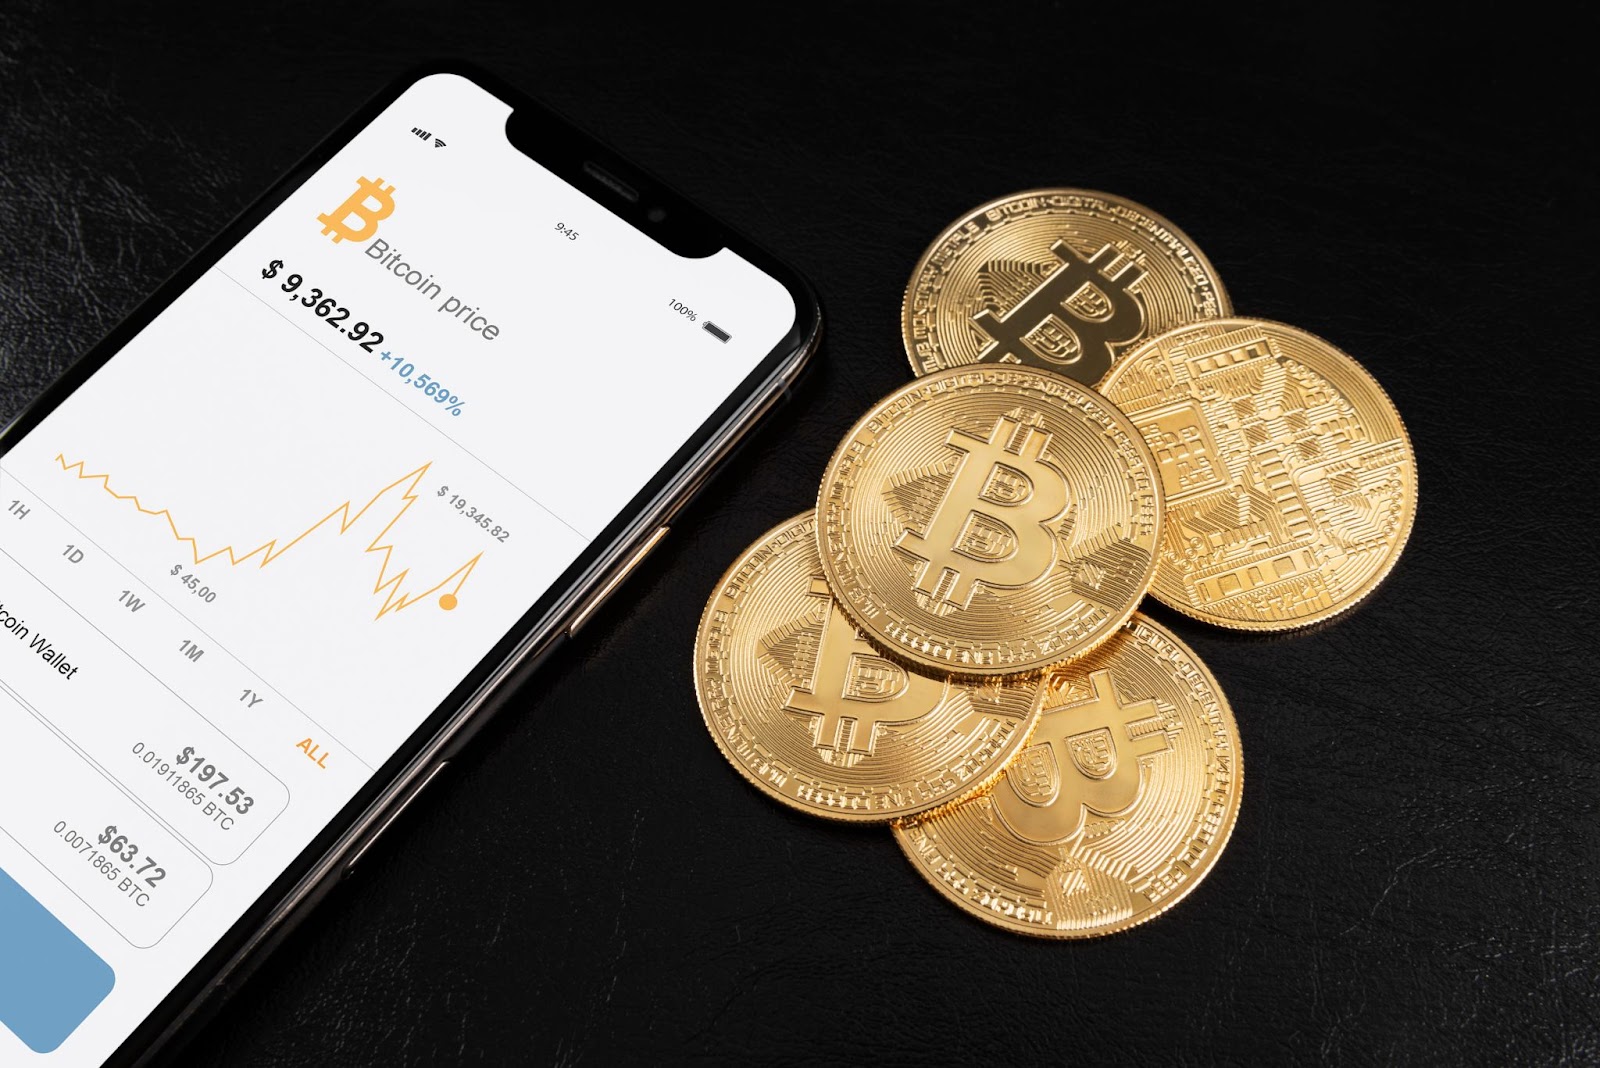 How to Invest in Cryptocurrency: Exchanges, Apps, Wallets and More